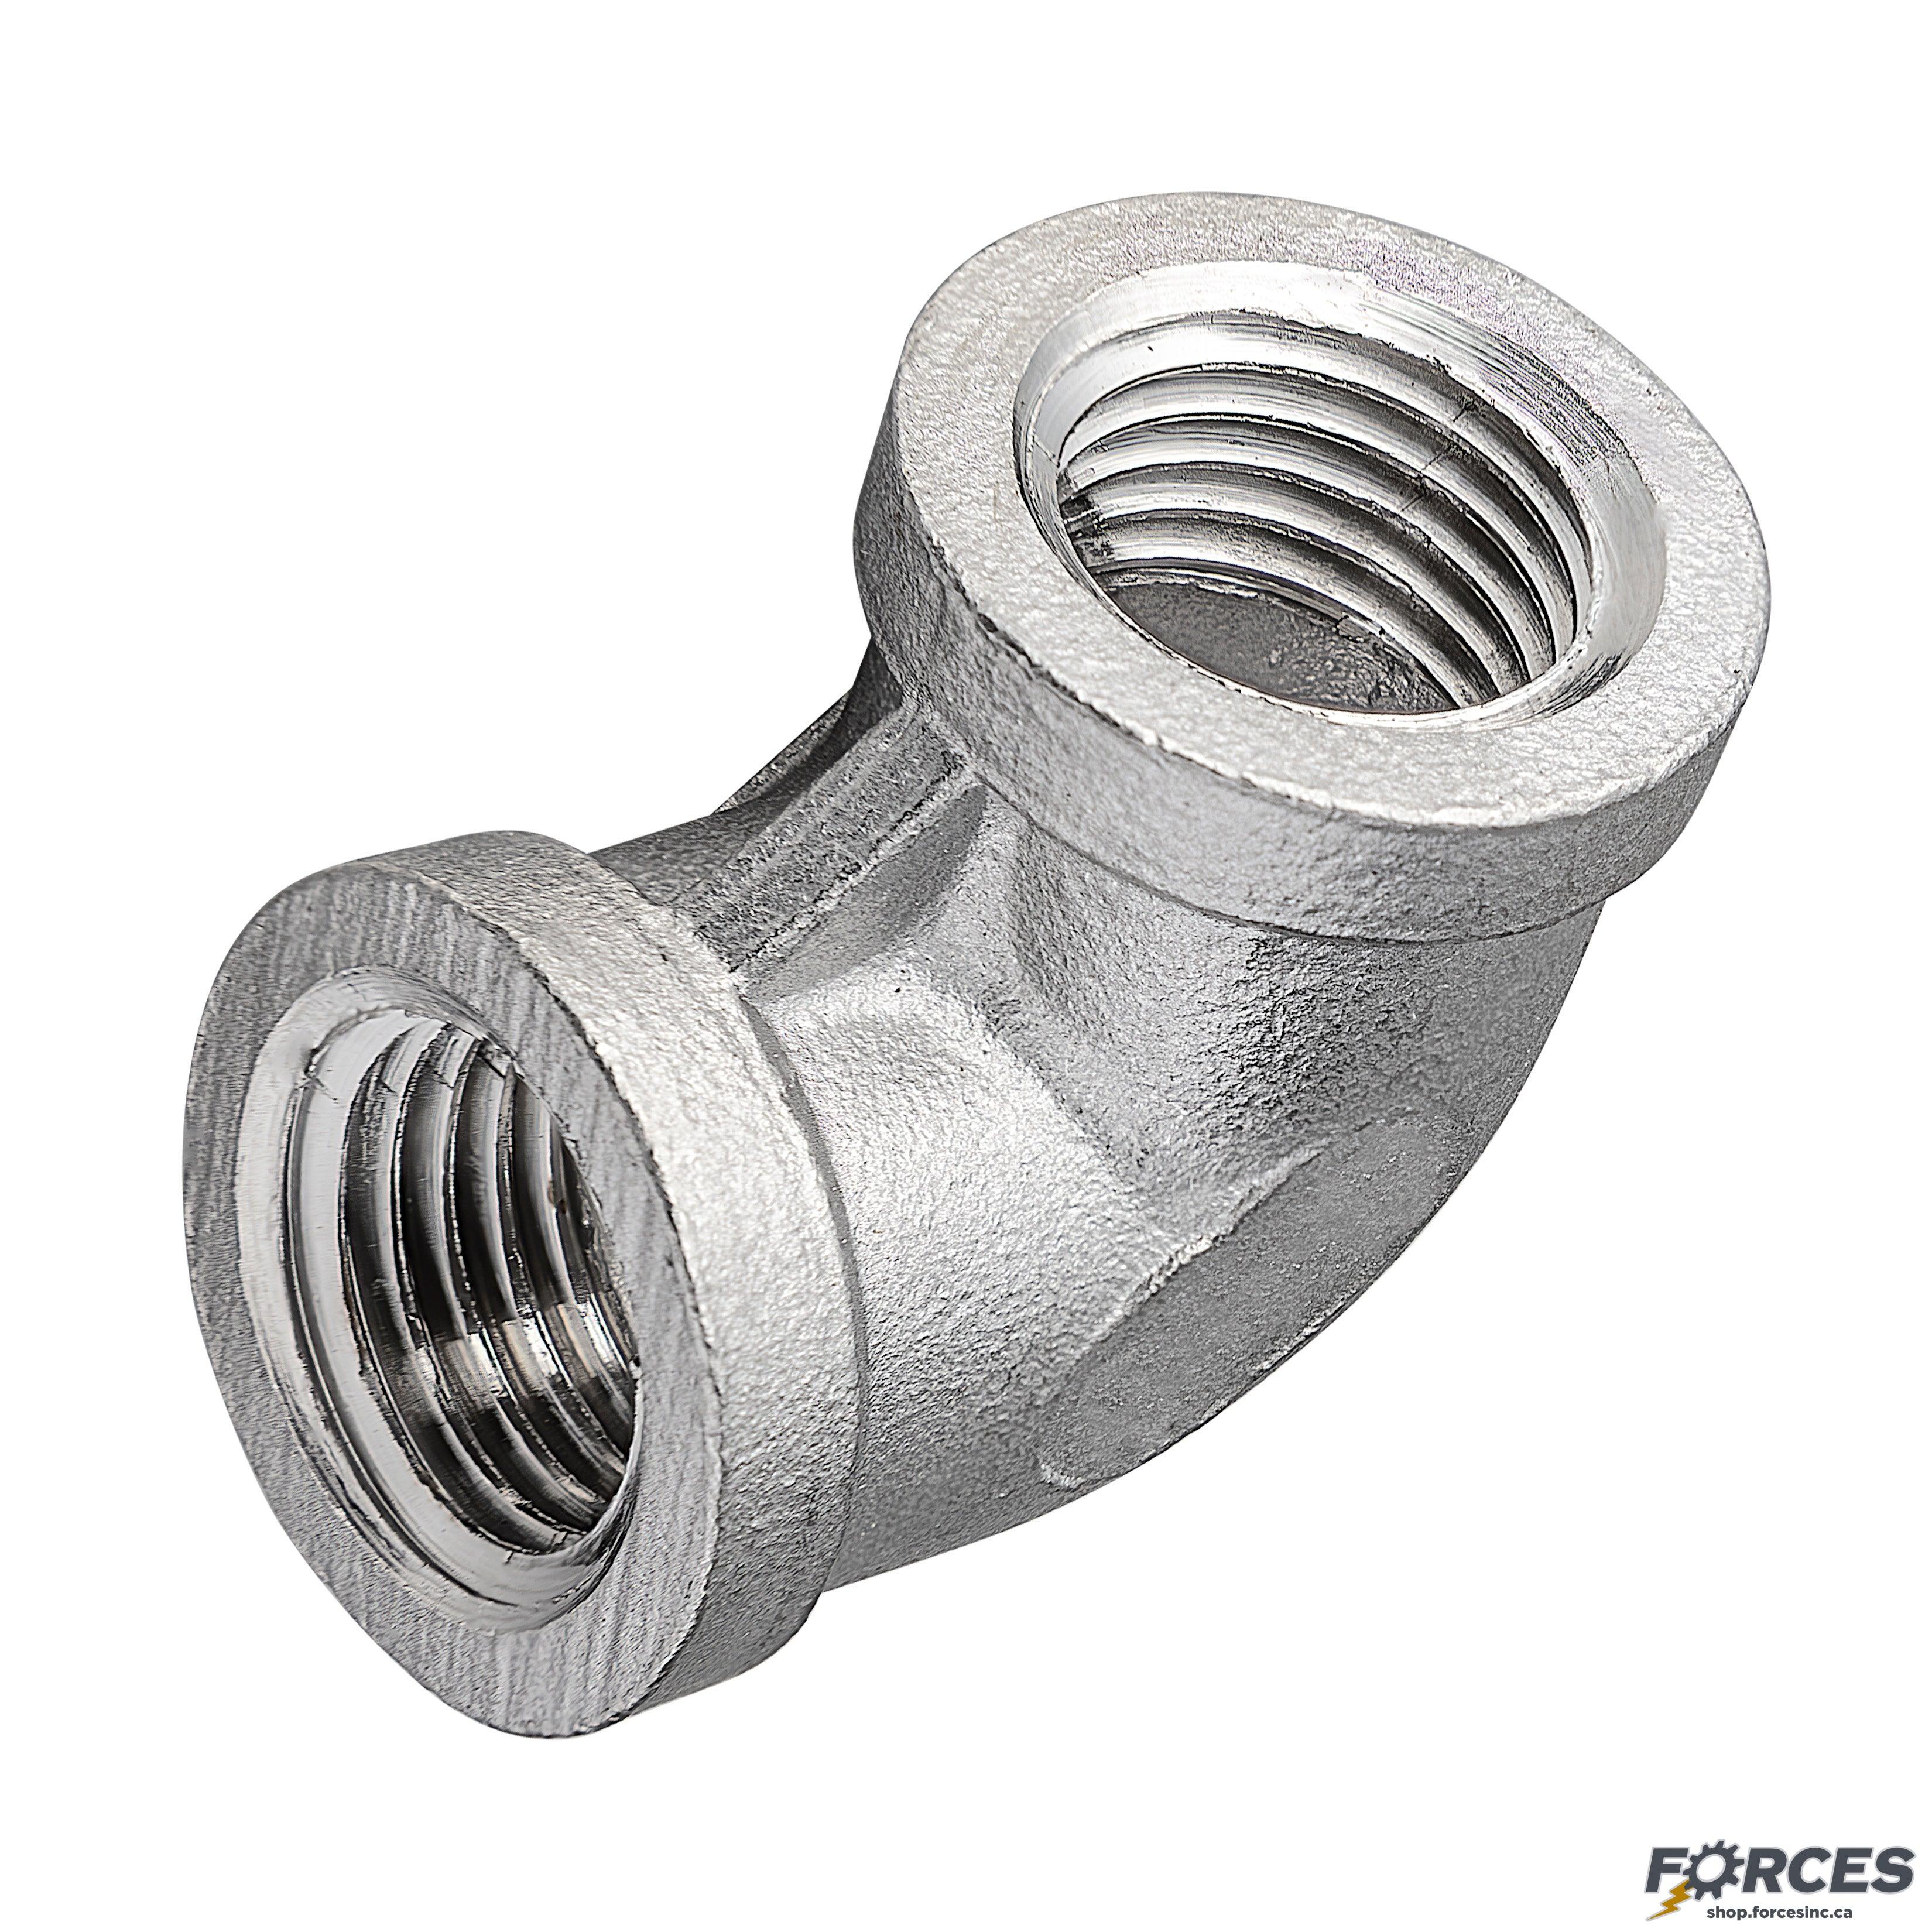 1-1/4" Elbow 90° NPT #150 - Stainless Steel 316 - Forces Inc